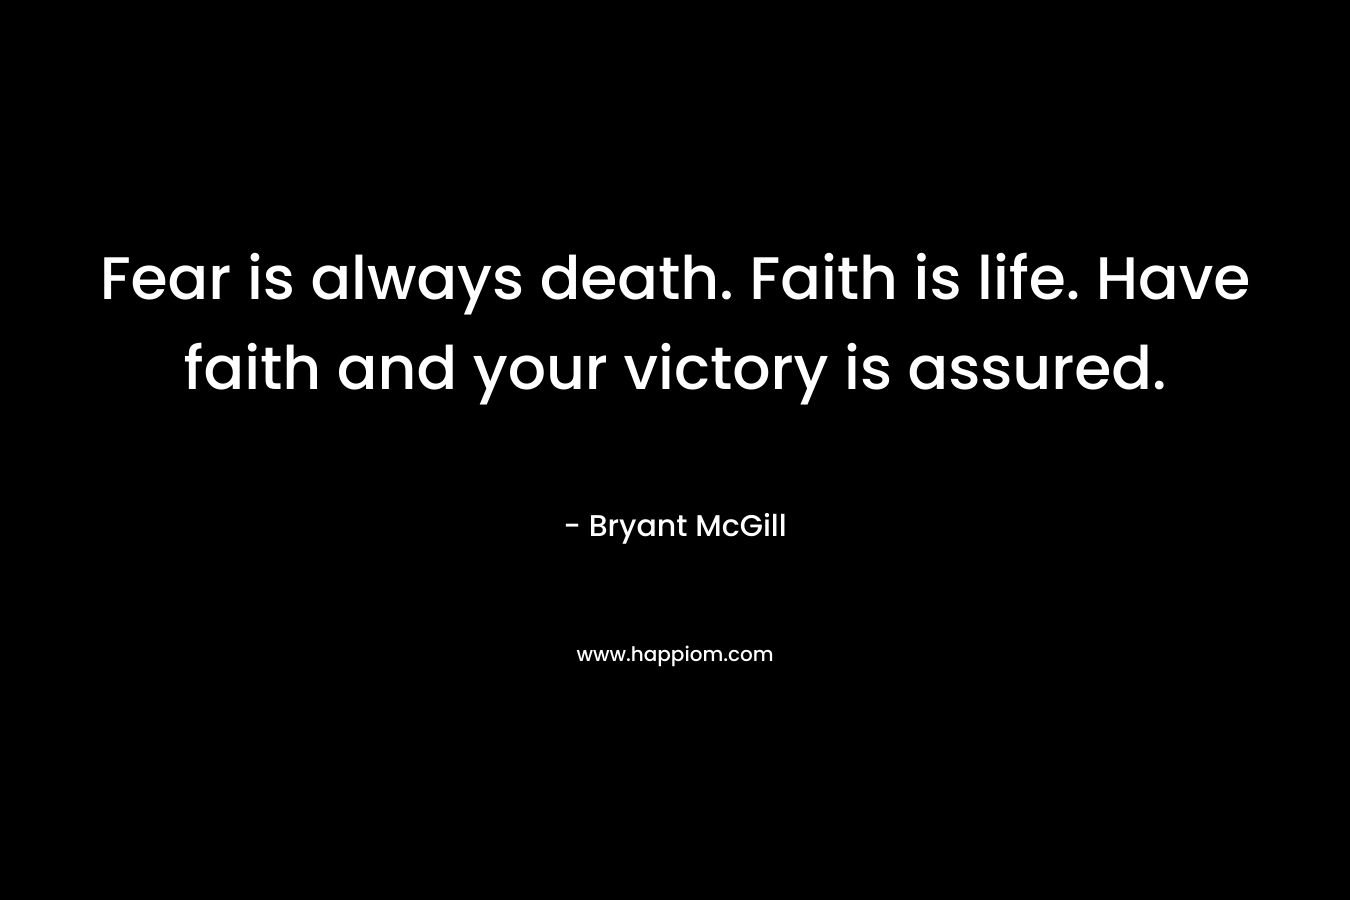 Fear is always death. Faith is life. Have faith and your victory is assured.